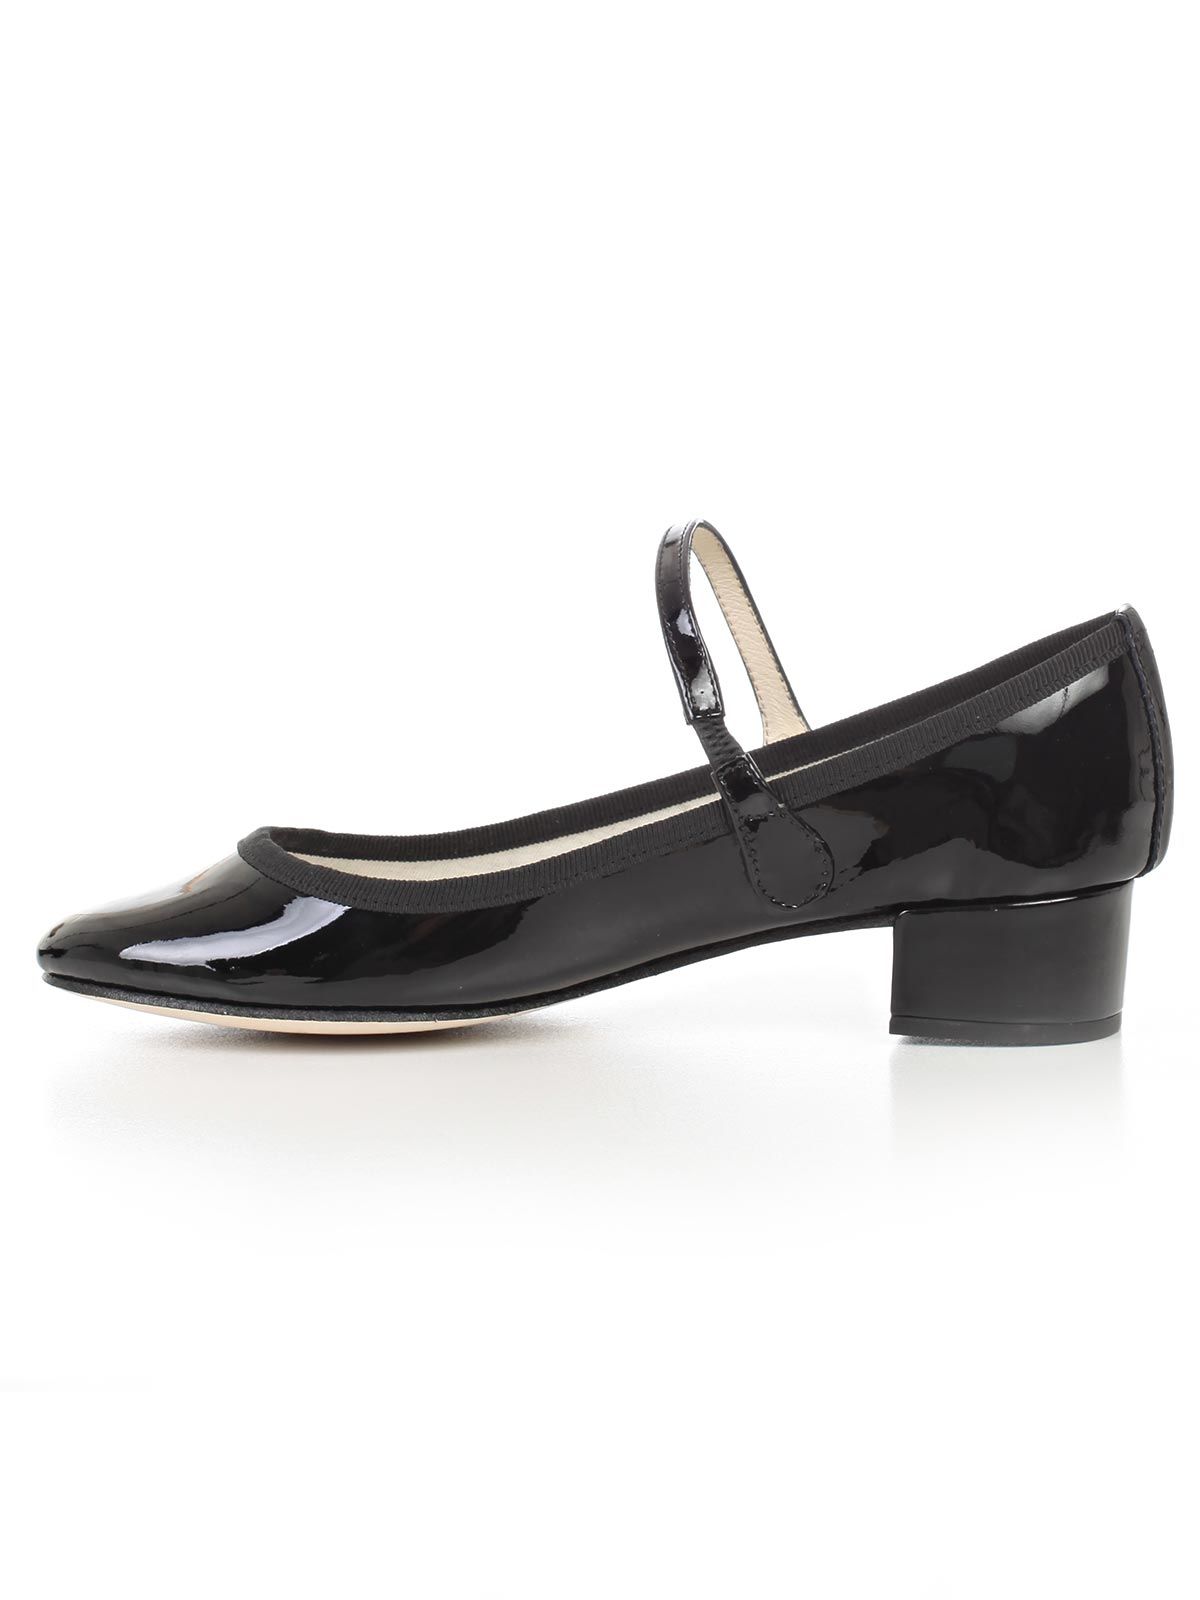 Repetto - Repetto High-heeled shoe - Black, Women's High-heeled shoes ...